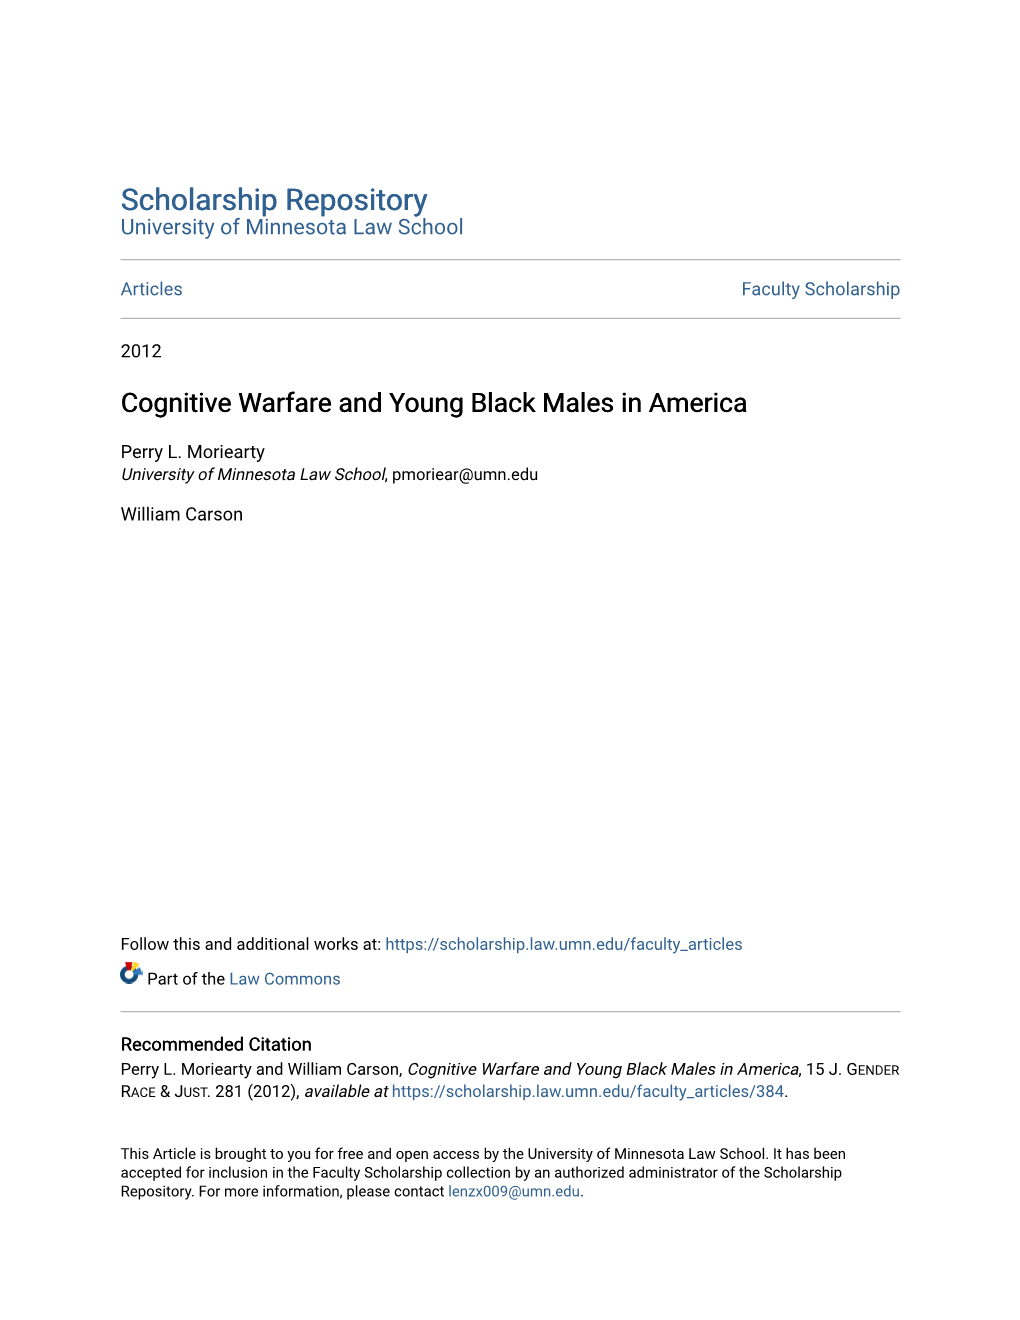 Cognitive Warfare and Young Black Males in America